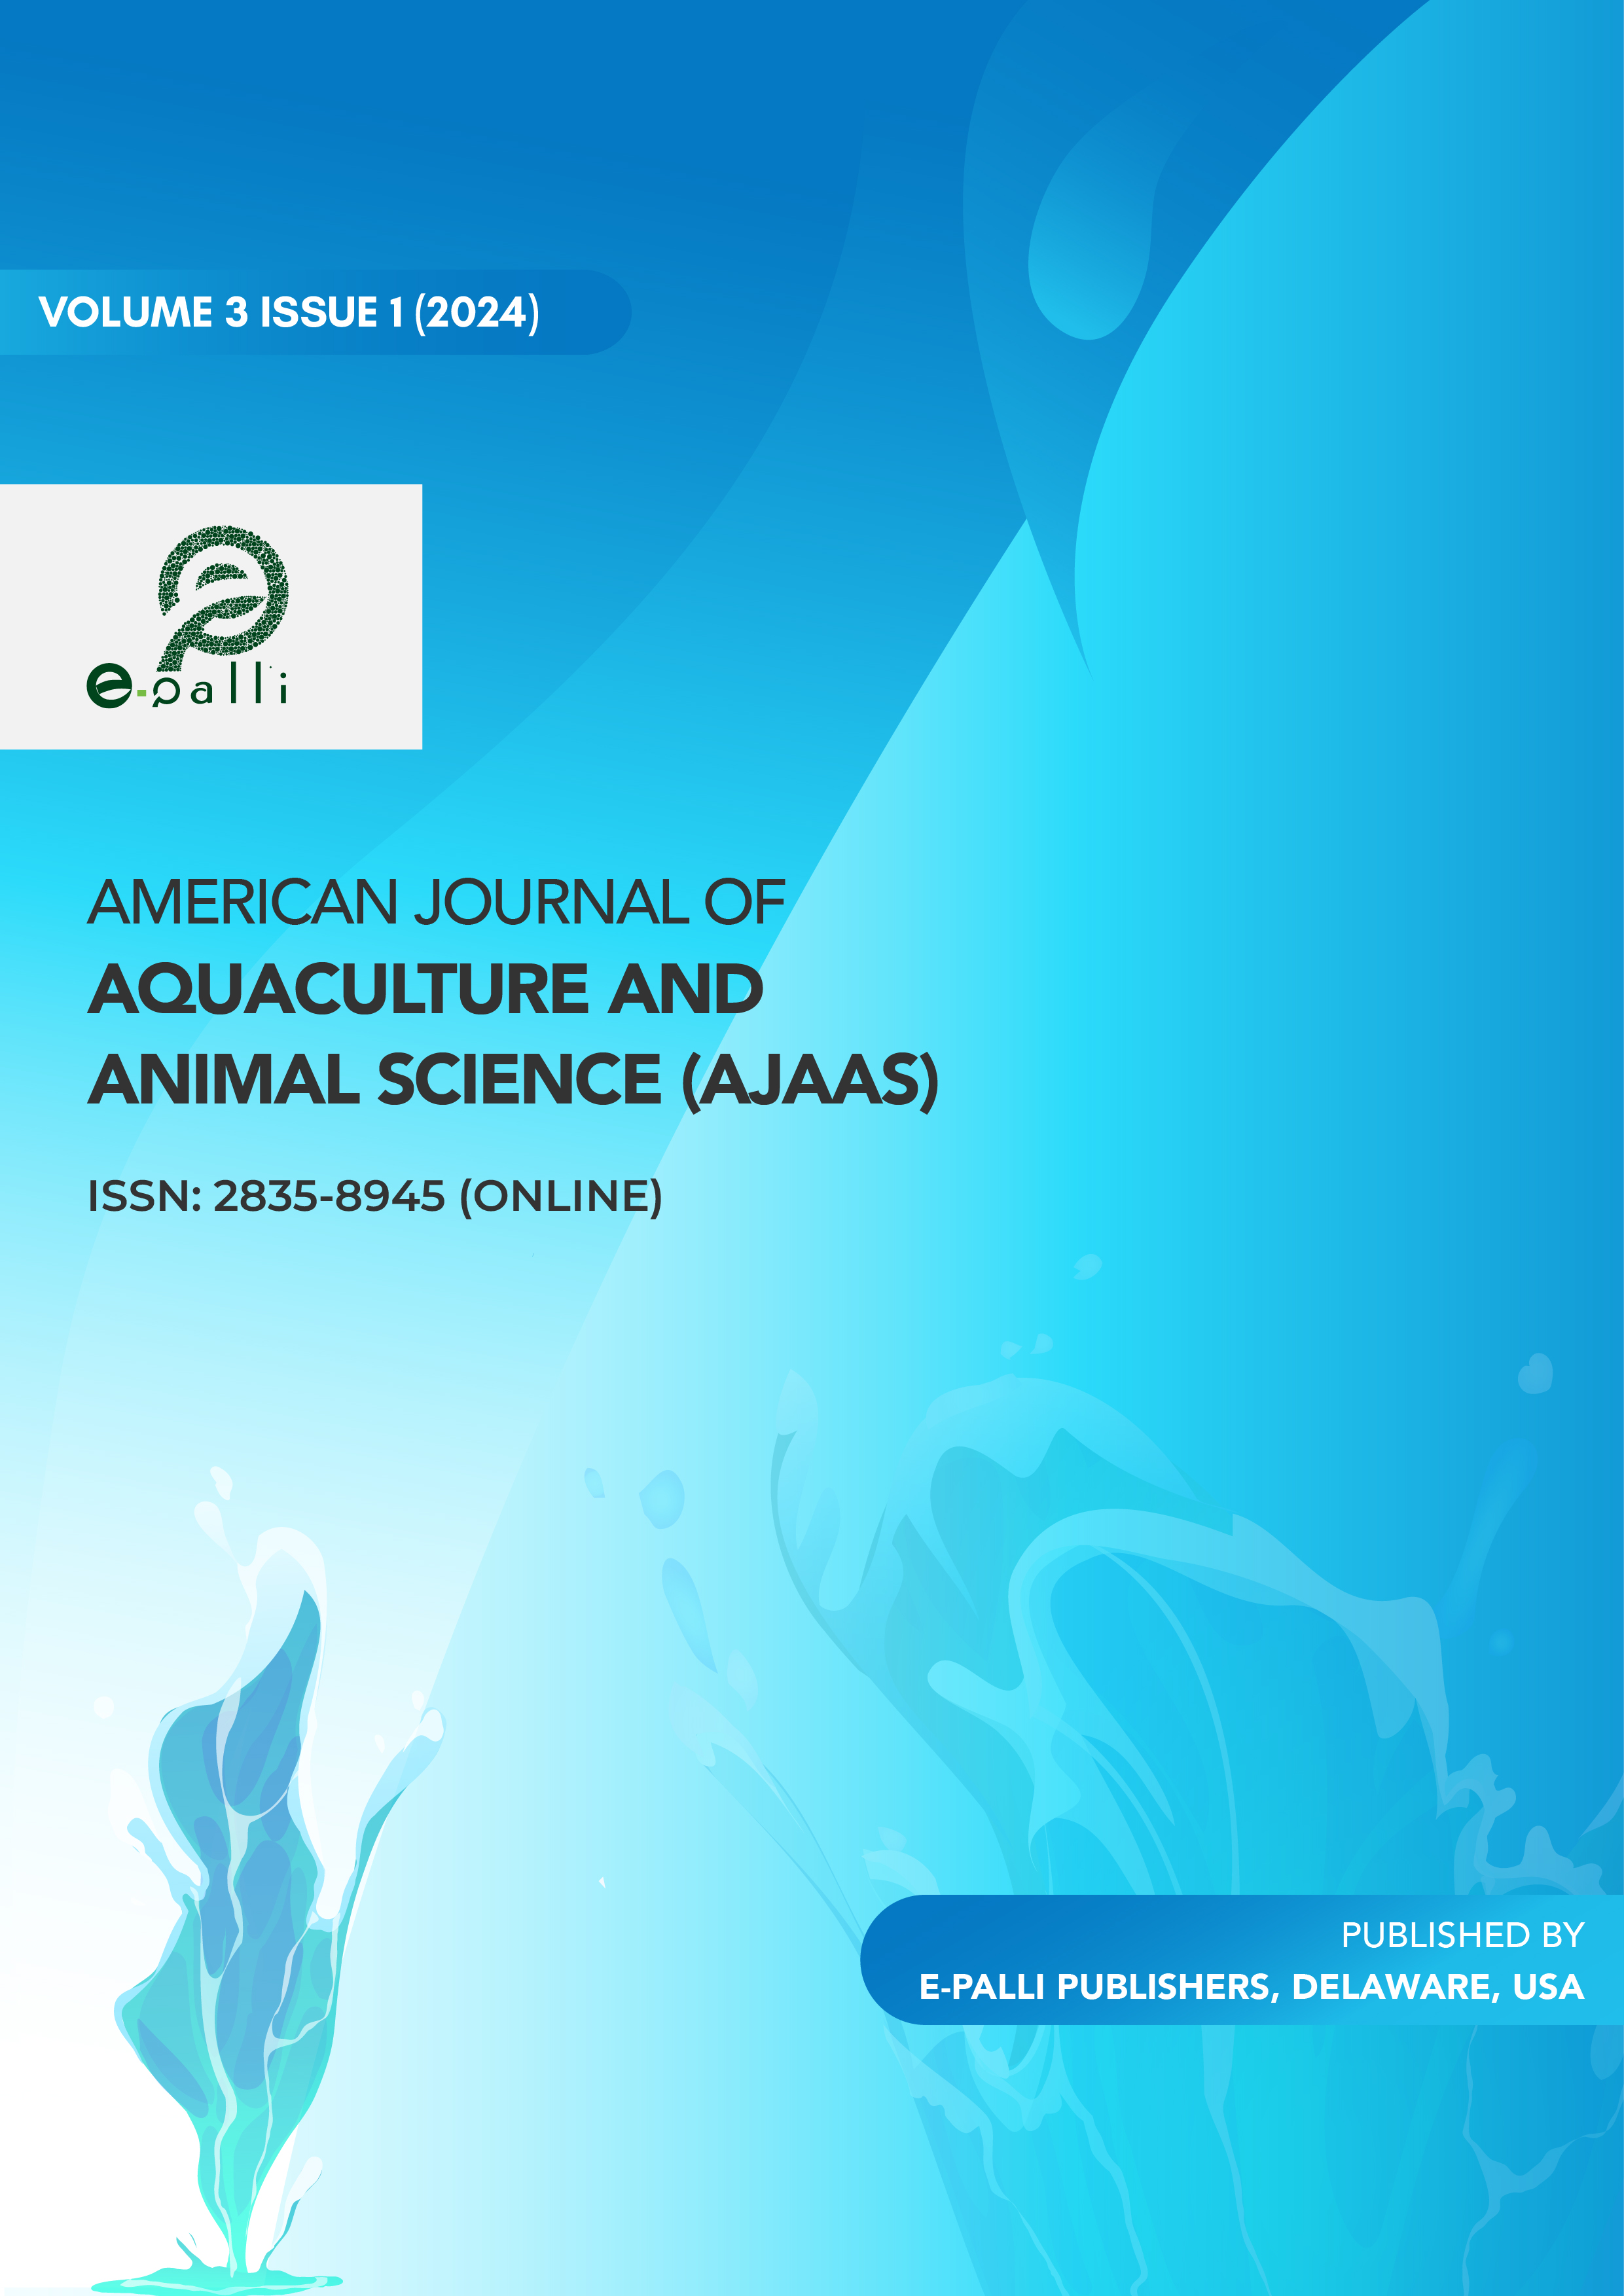 					View Vol. 3 No. 1 (2024): American Journal of Aquaculture and Animal Science
				